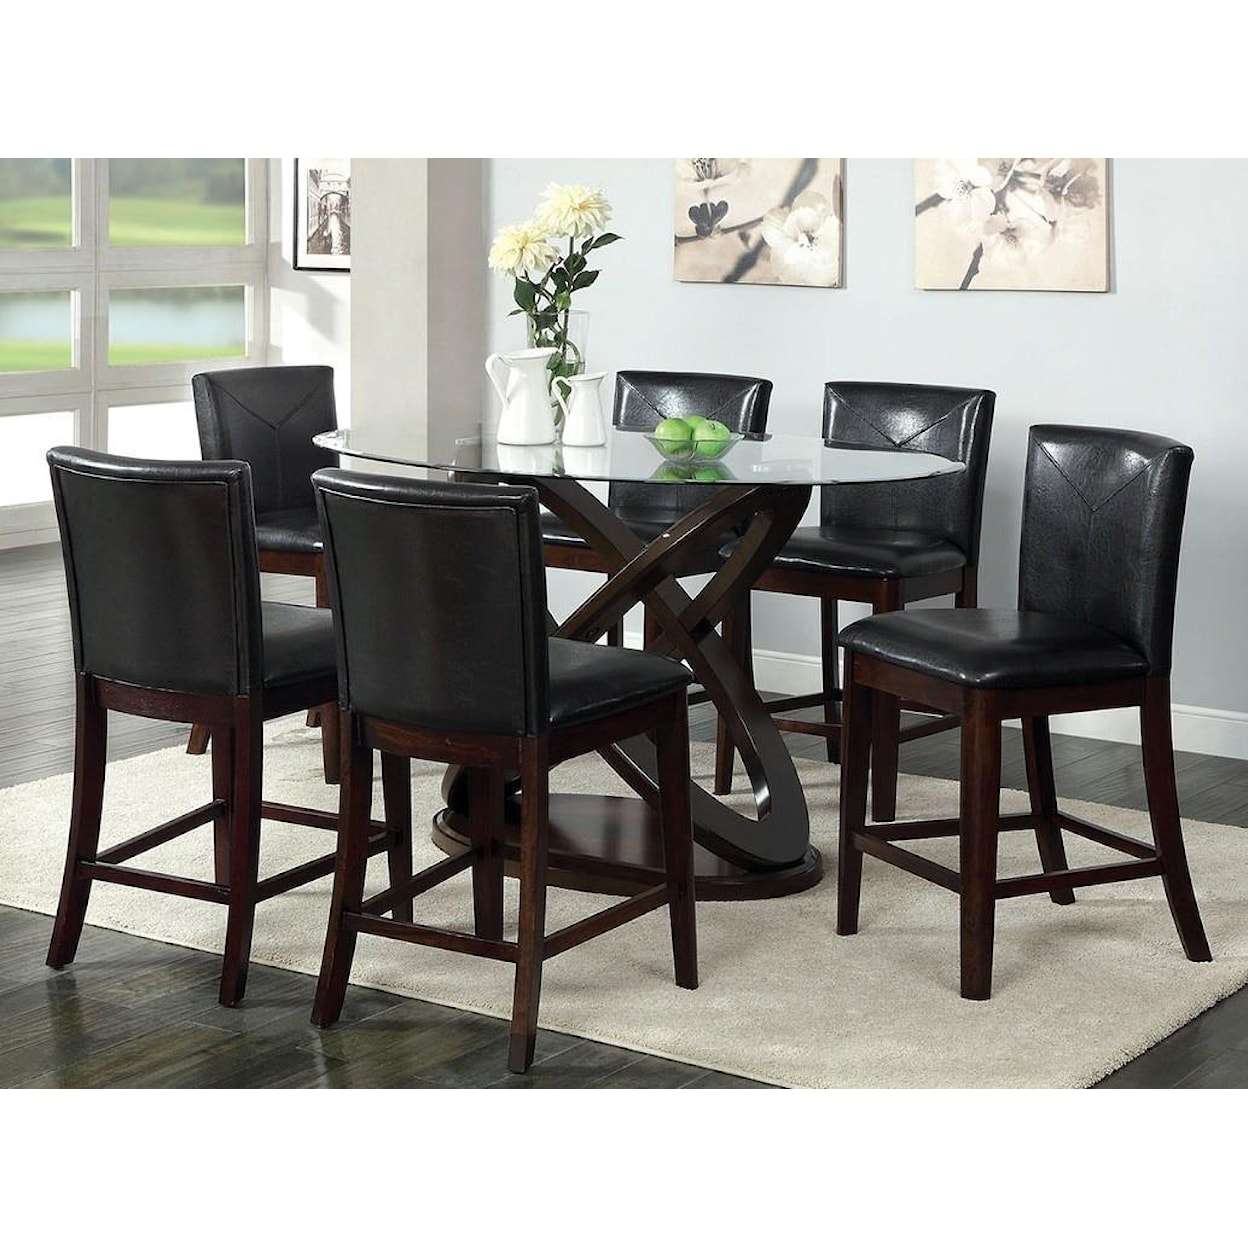 Furniture of America - FOA Antenna II 5pc Counter Height Table Dining Set